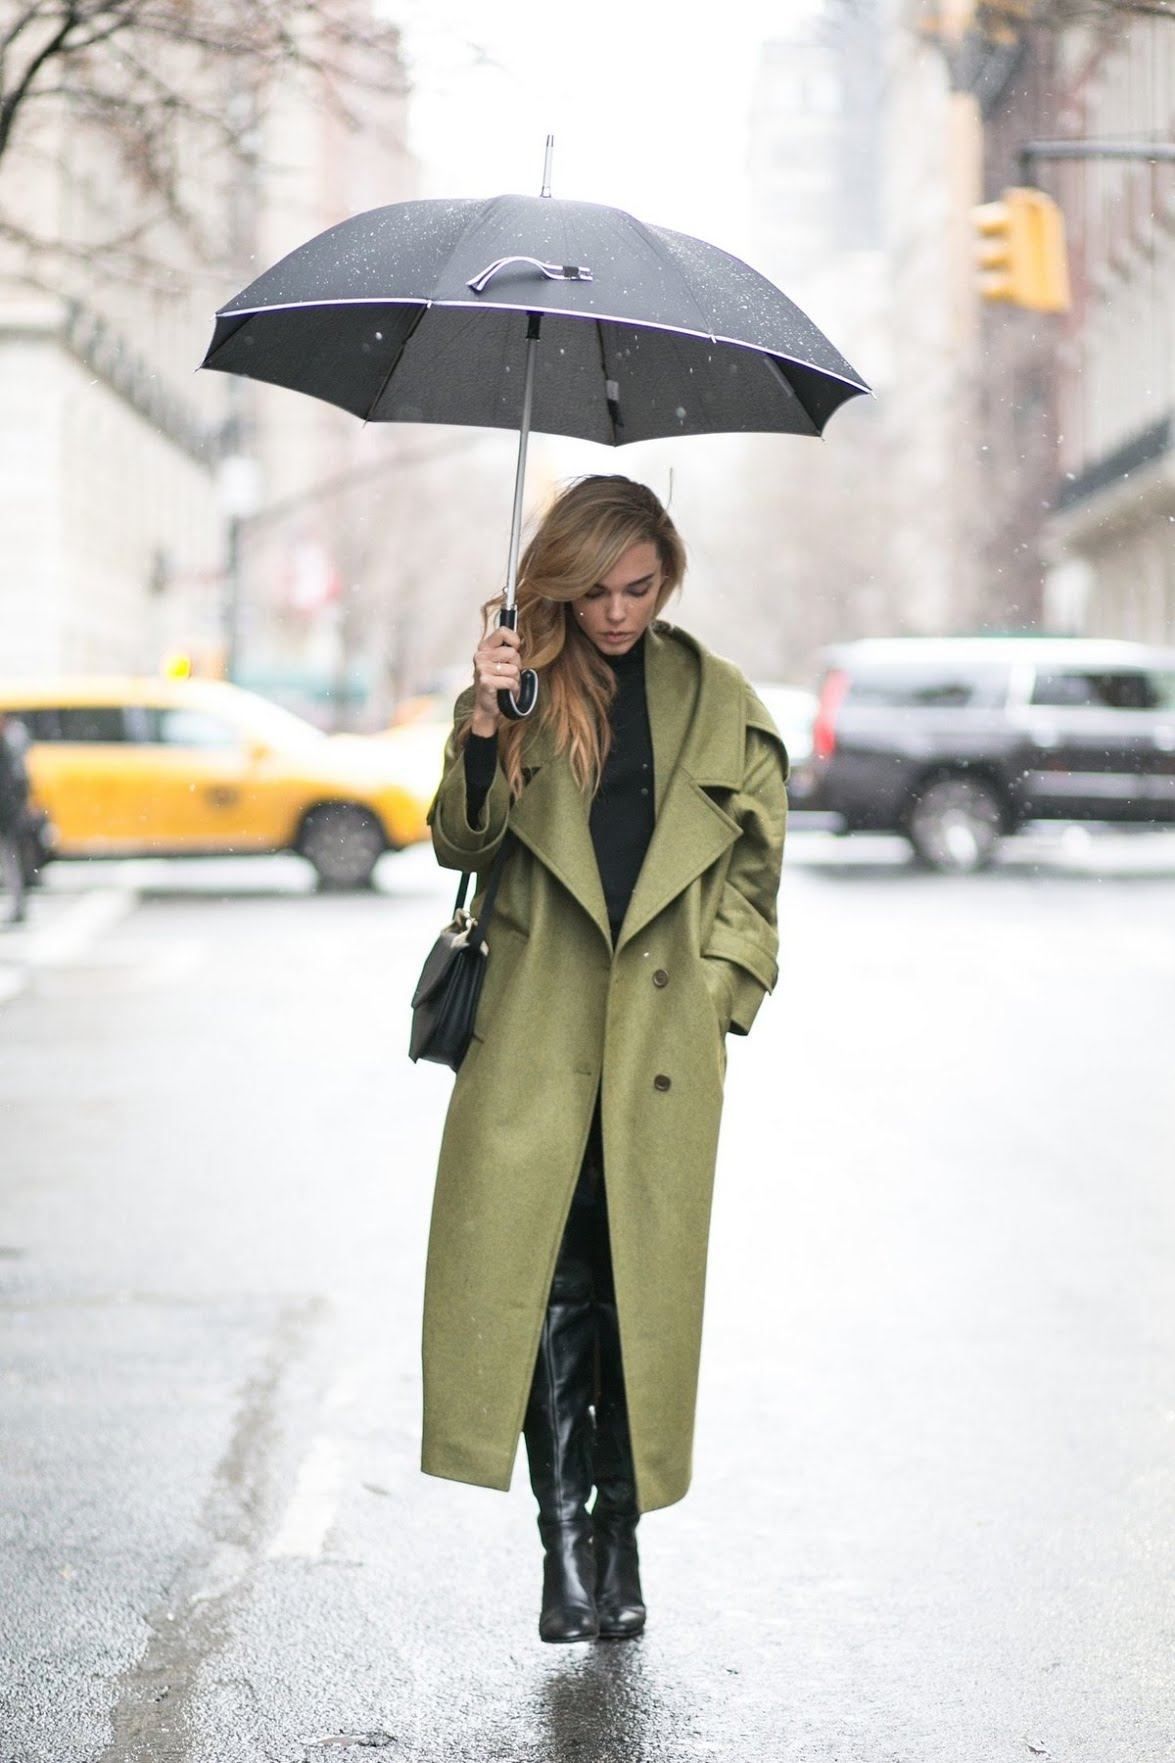 Cute Cold Rainy Day Outfits